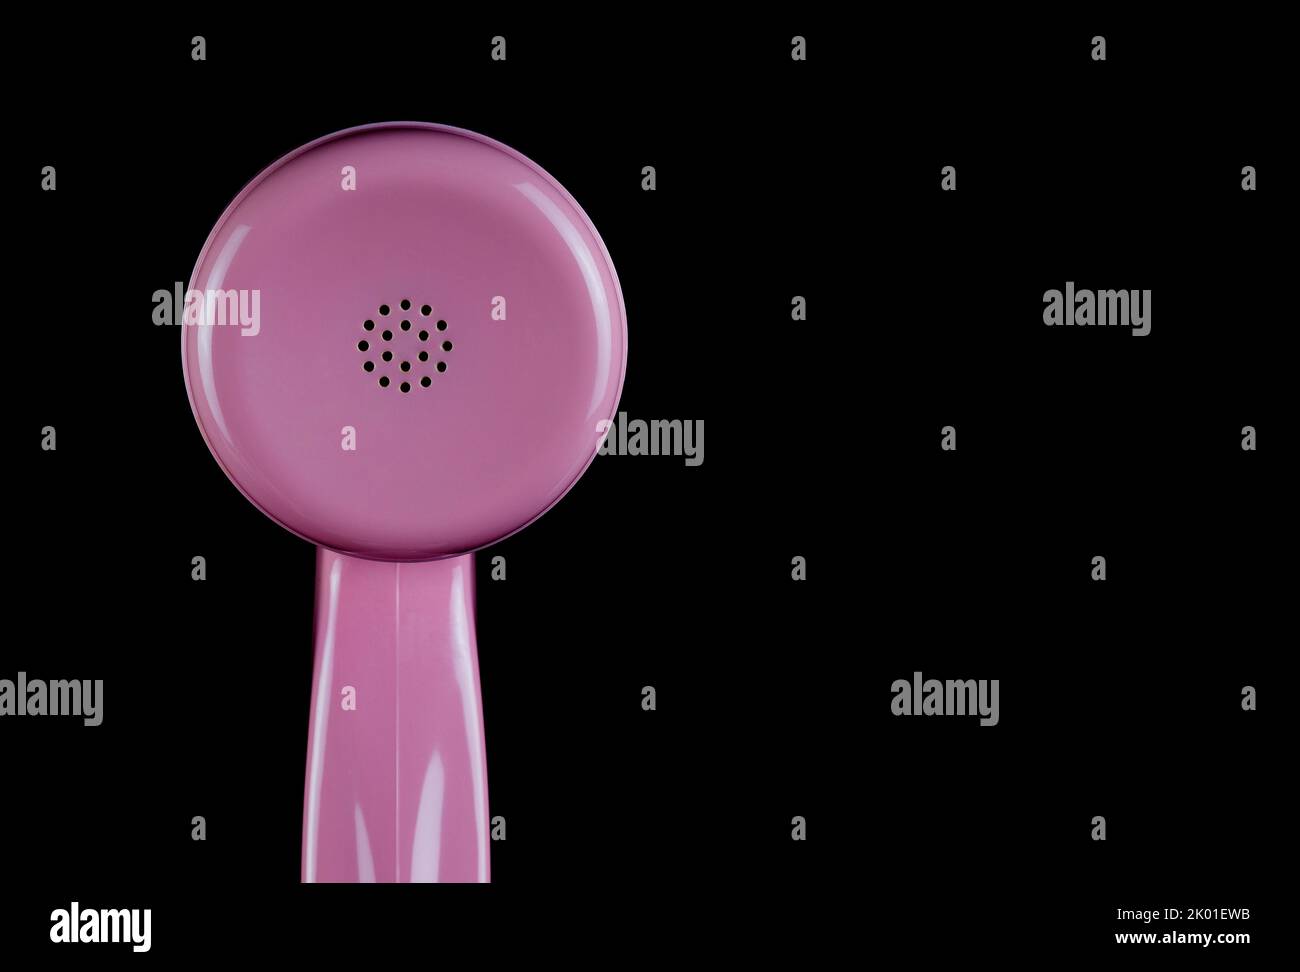 Pink telephone receiver earpiece section isolated on a black background Stock Photo